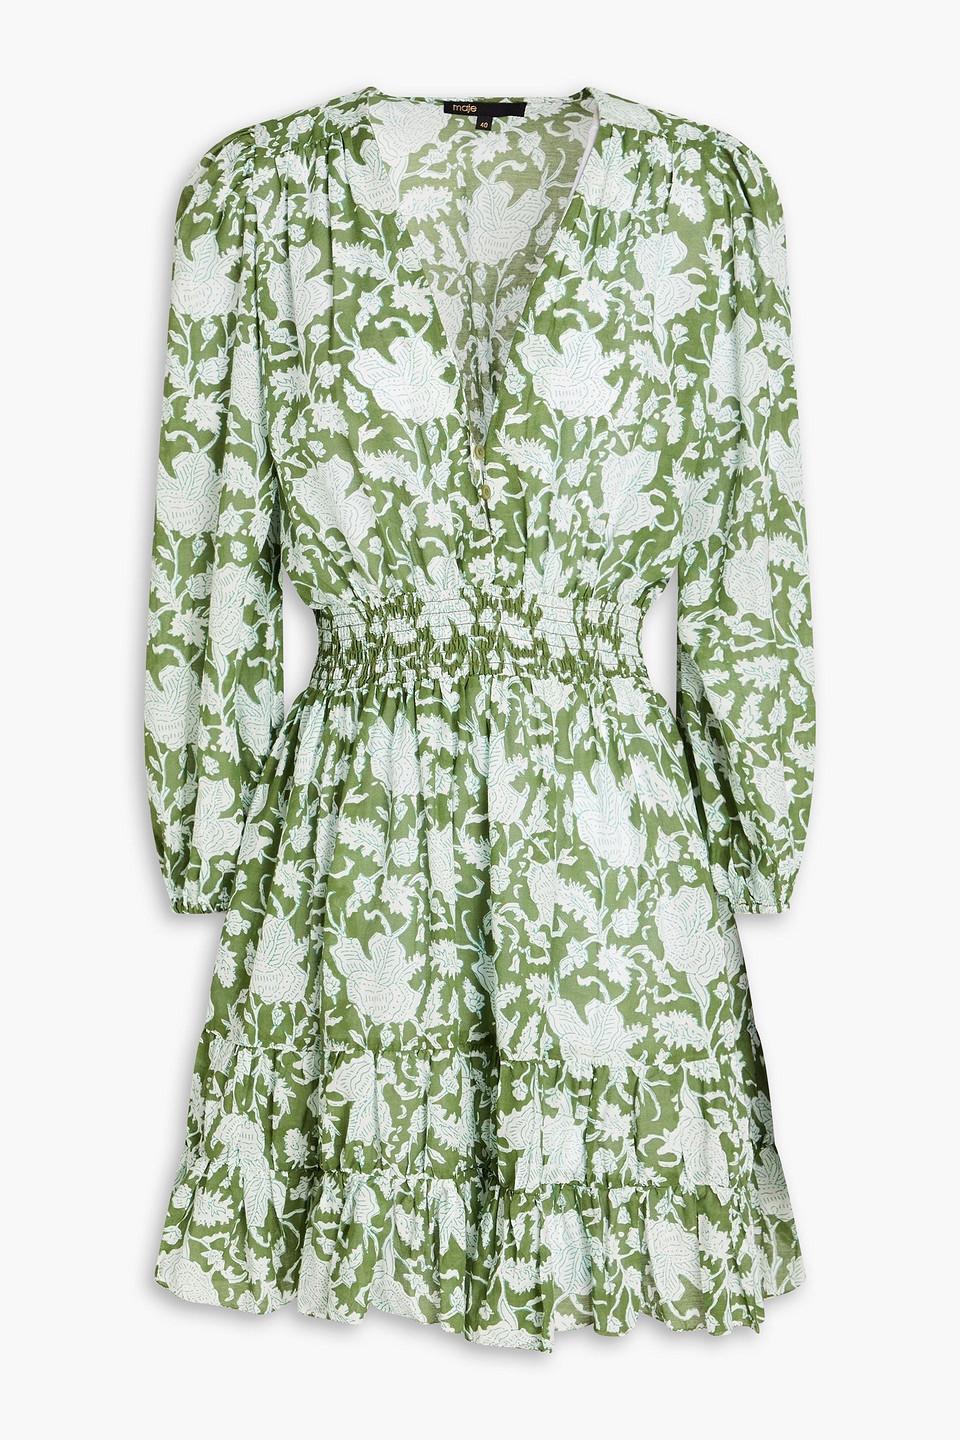 Maje Shirred Printed Cotton-blend Mousseline Mini Dress in Green | Lyst